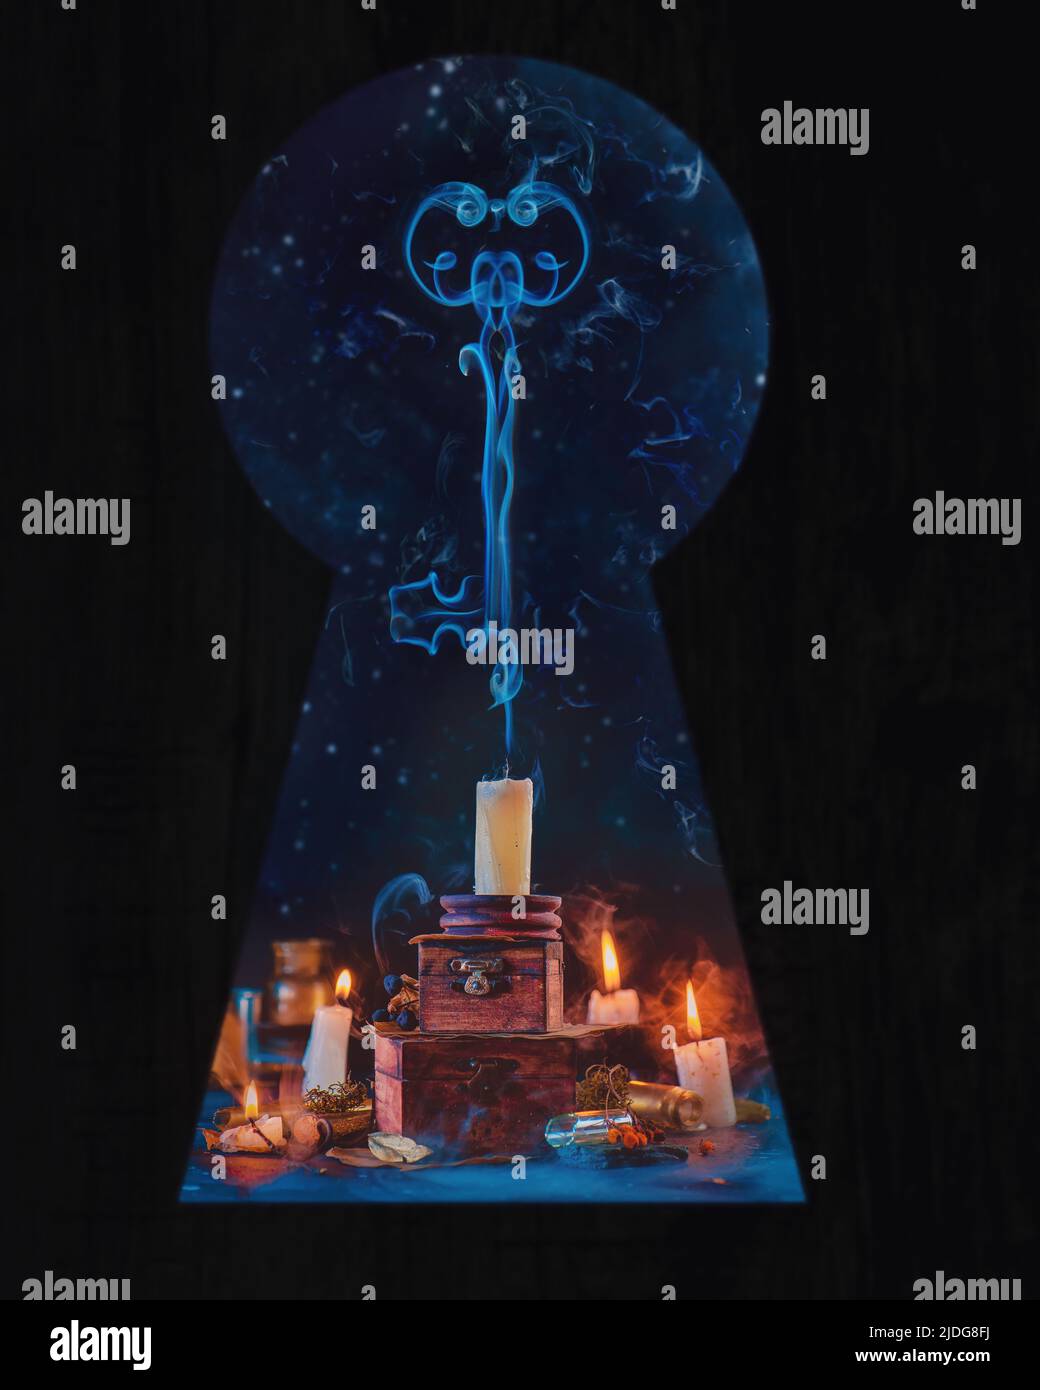 Keyhole looking on candles with smoke in the shape of a key, magical scene Stock Photo